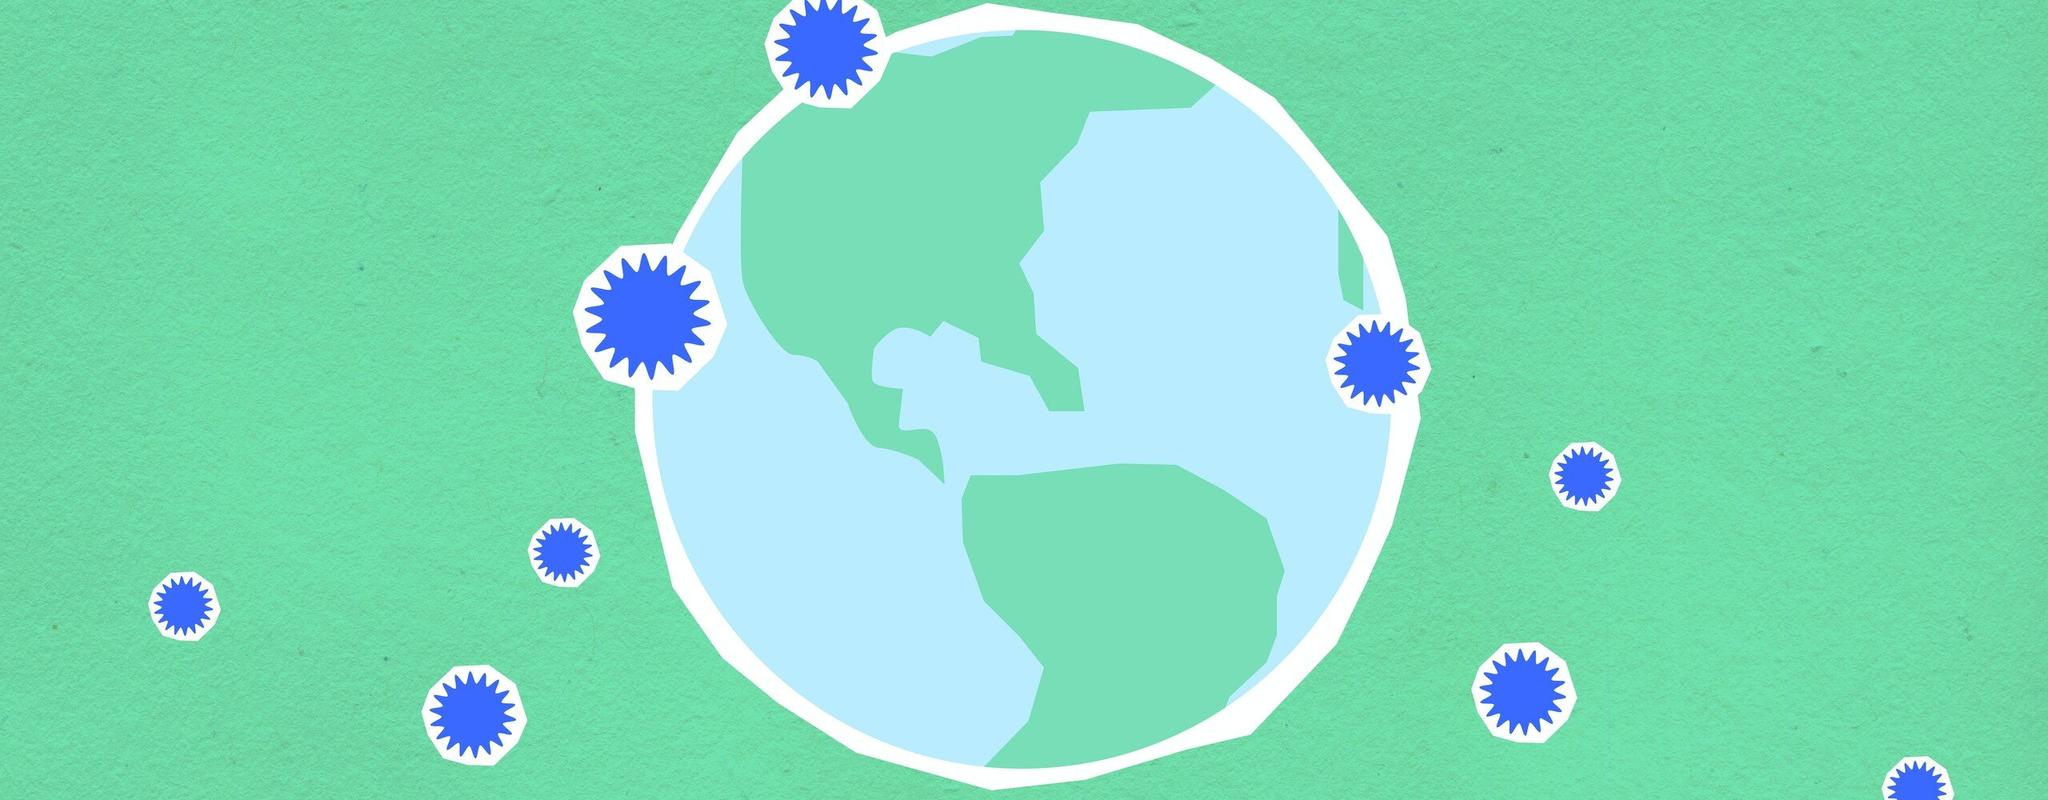 An illustration of the globe on a green background with blue star-like dots scattered around.